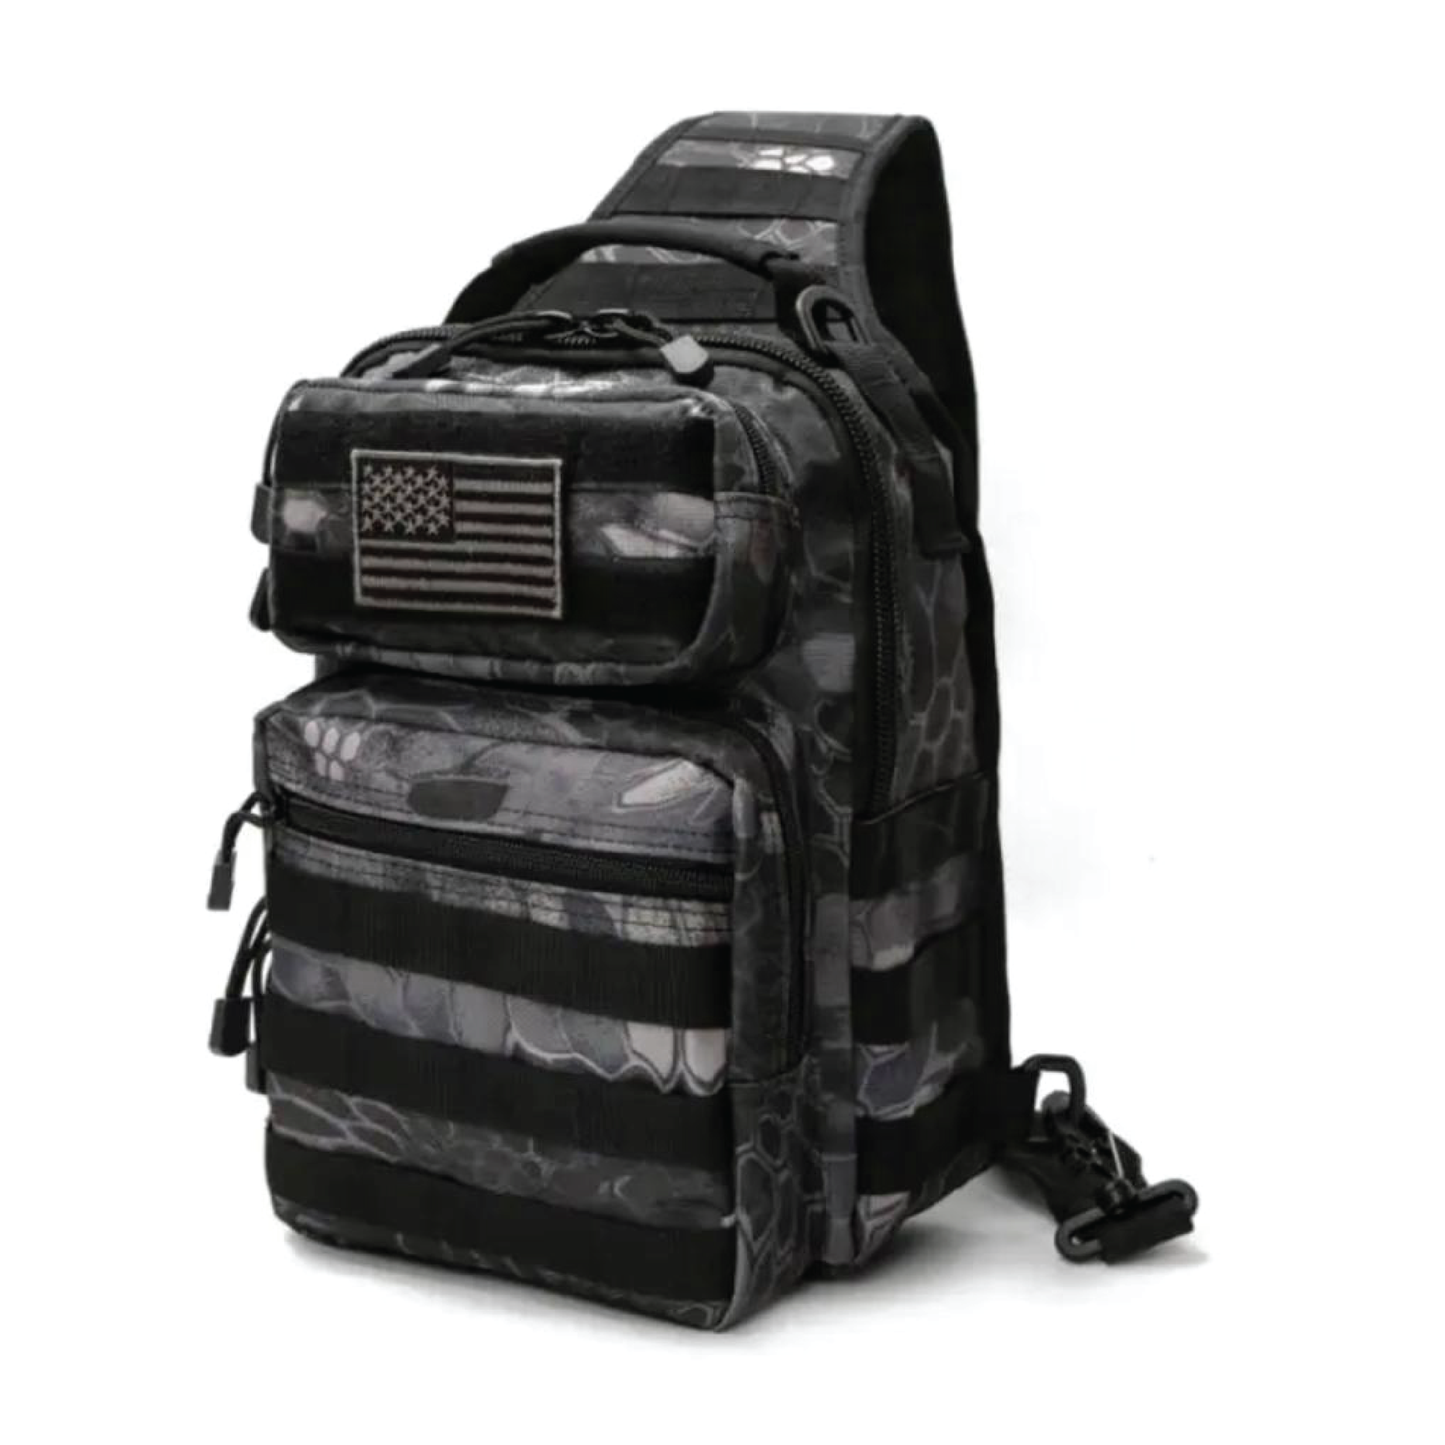 20" TACTICAL CHEST BACKPACK MOLLE